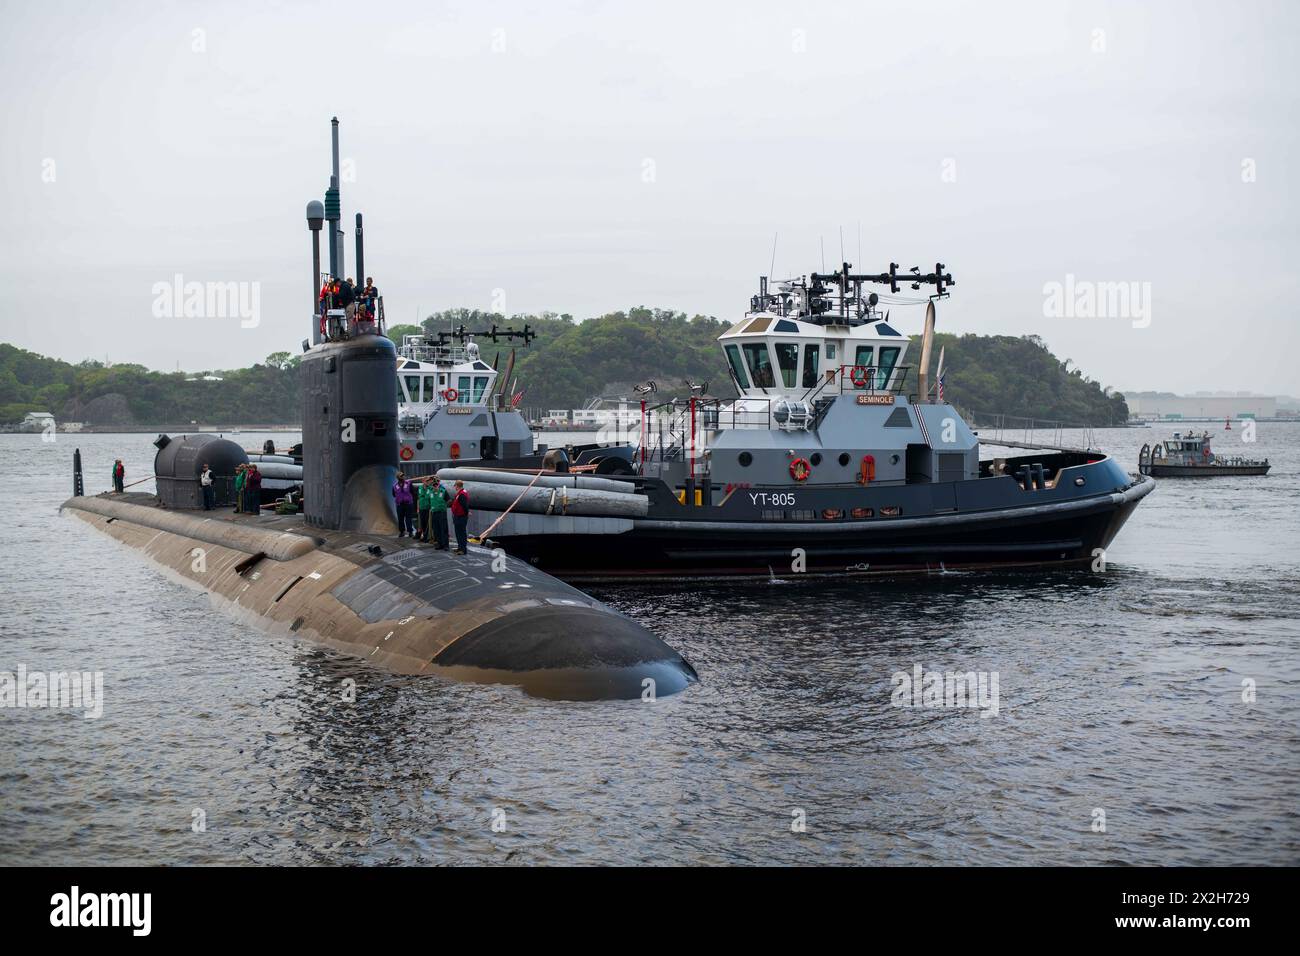 Yokosuka, Japan. 18 April, 2024. The U.S. Navy nuclear-power Virginia-class fast attack submarine USS Mississippi arrives for a scheduled port visit to Fleet Activities Yokosuka, April 18, 2024, in Yokosuka, Japan.  Credit: PO1 Brandon Holland/U.S. Marines/Alamy Live News Stock Photo